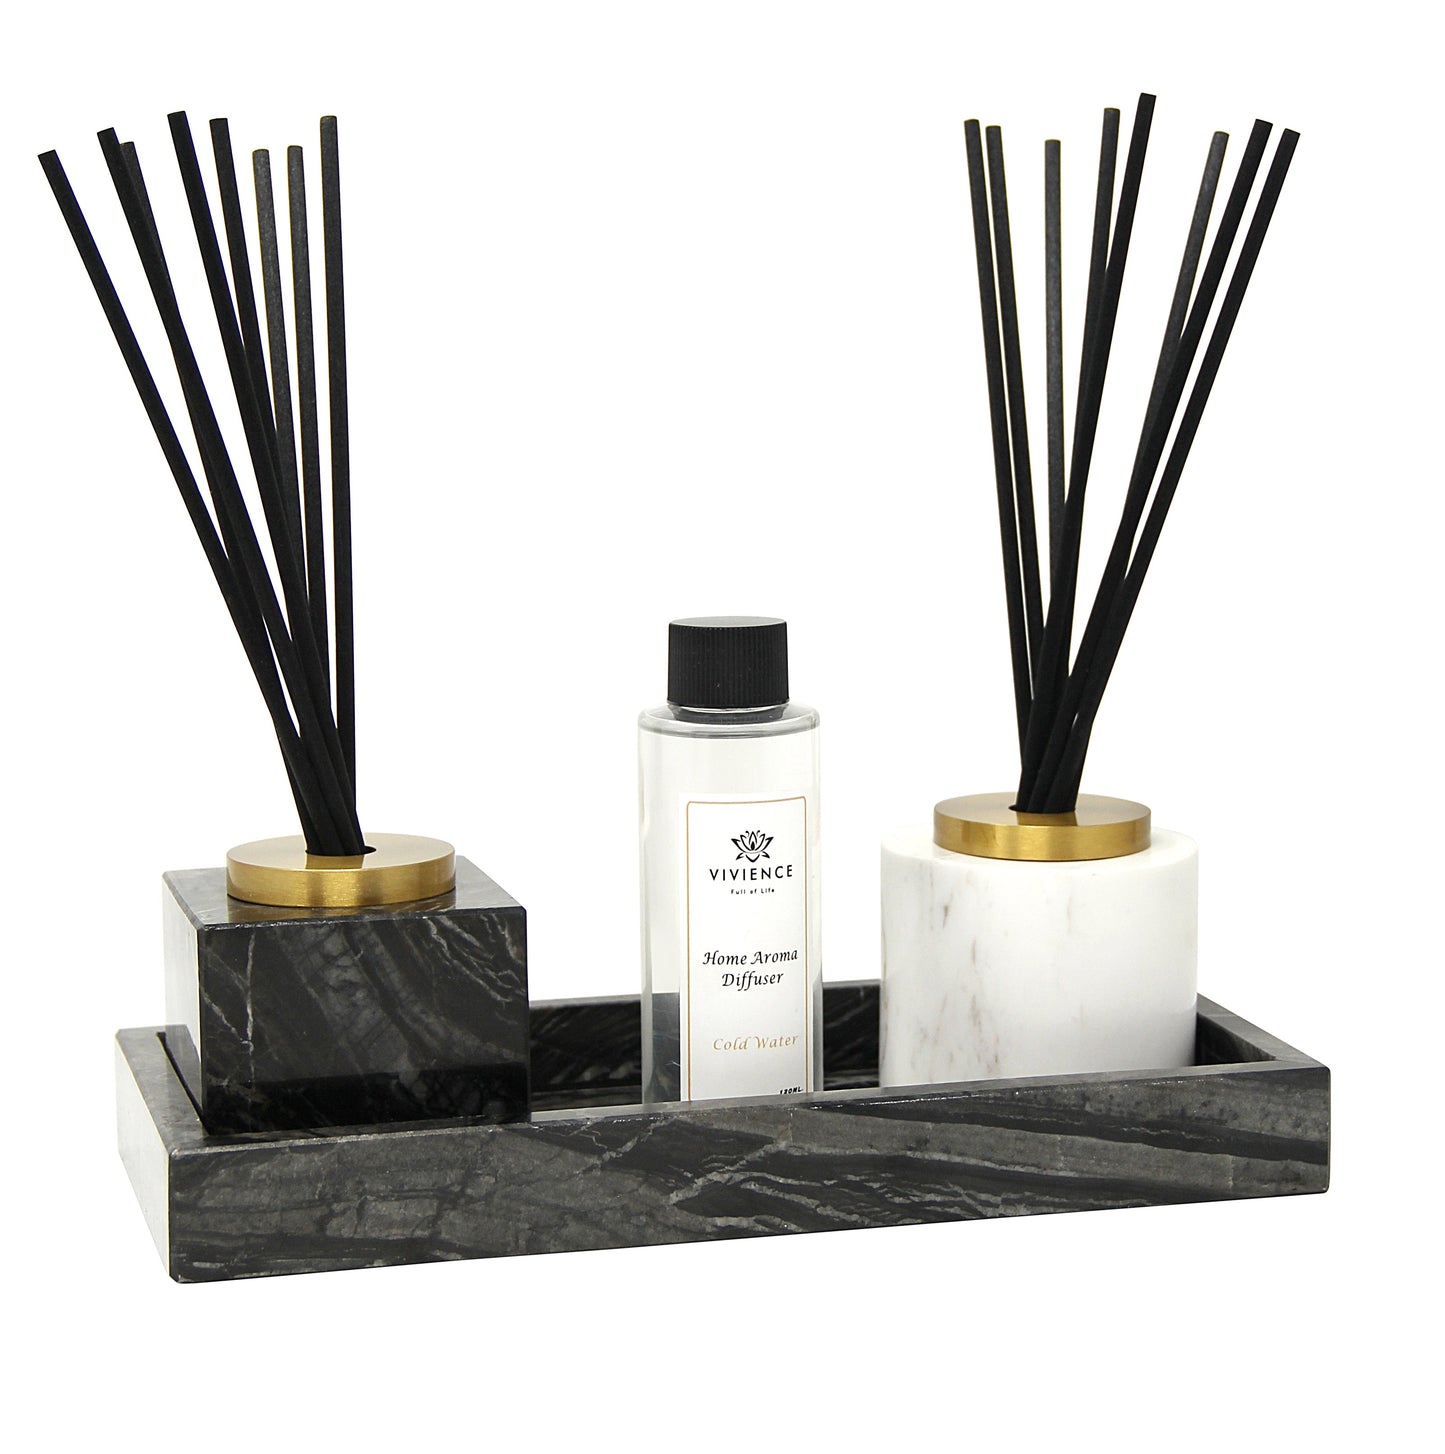 White Marble Reed Diffuser, "White Flower" Scent